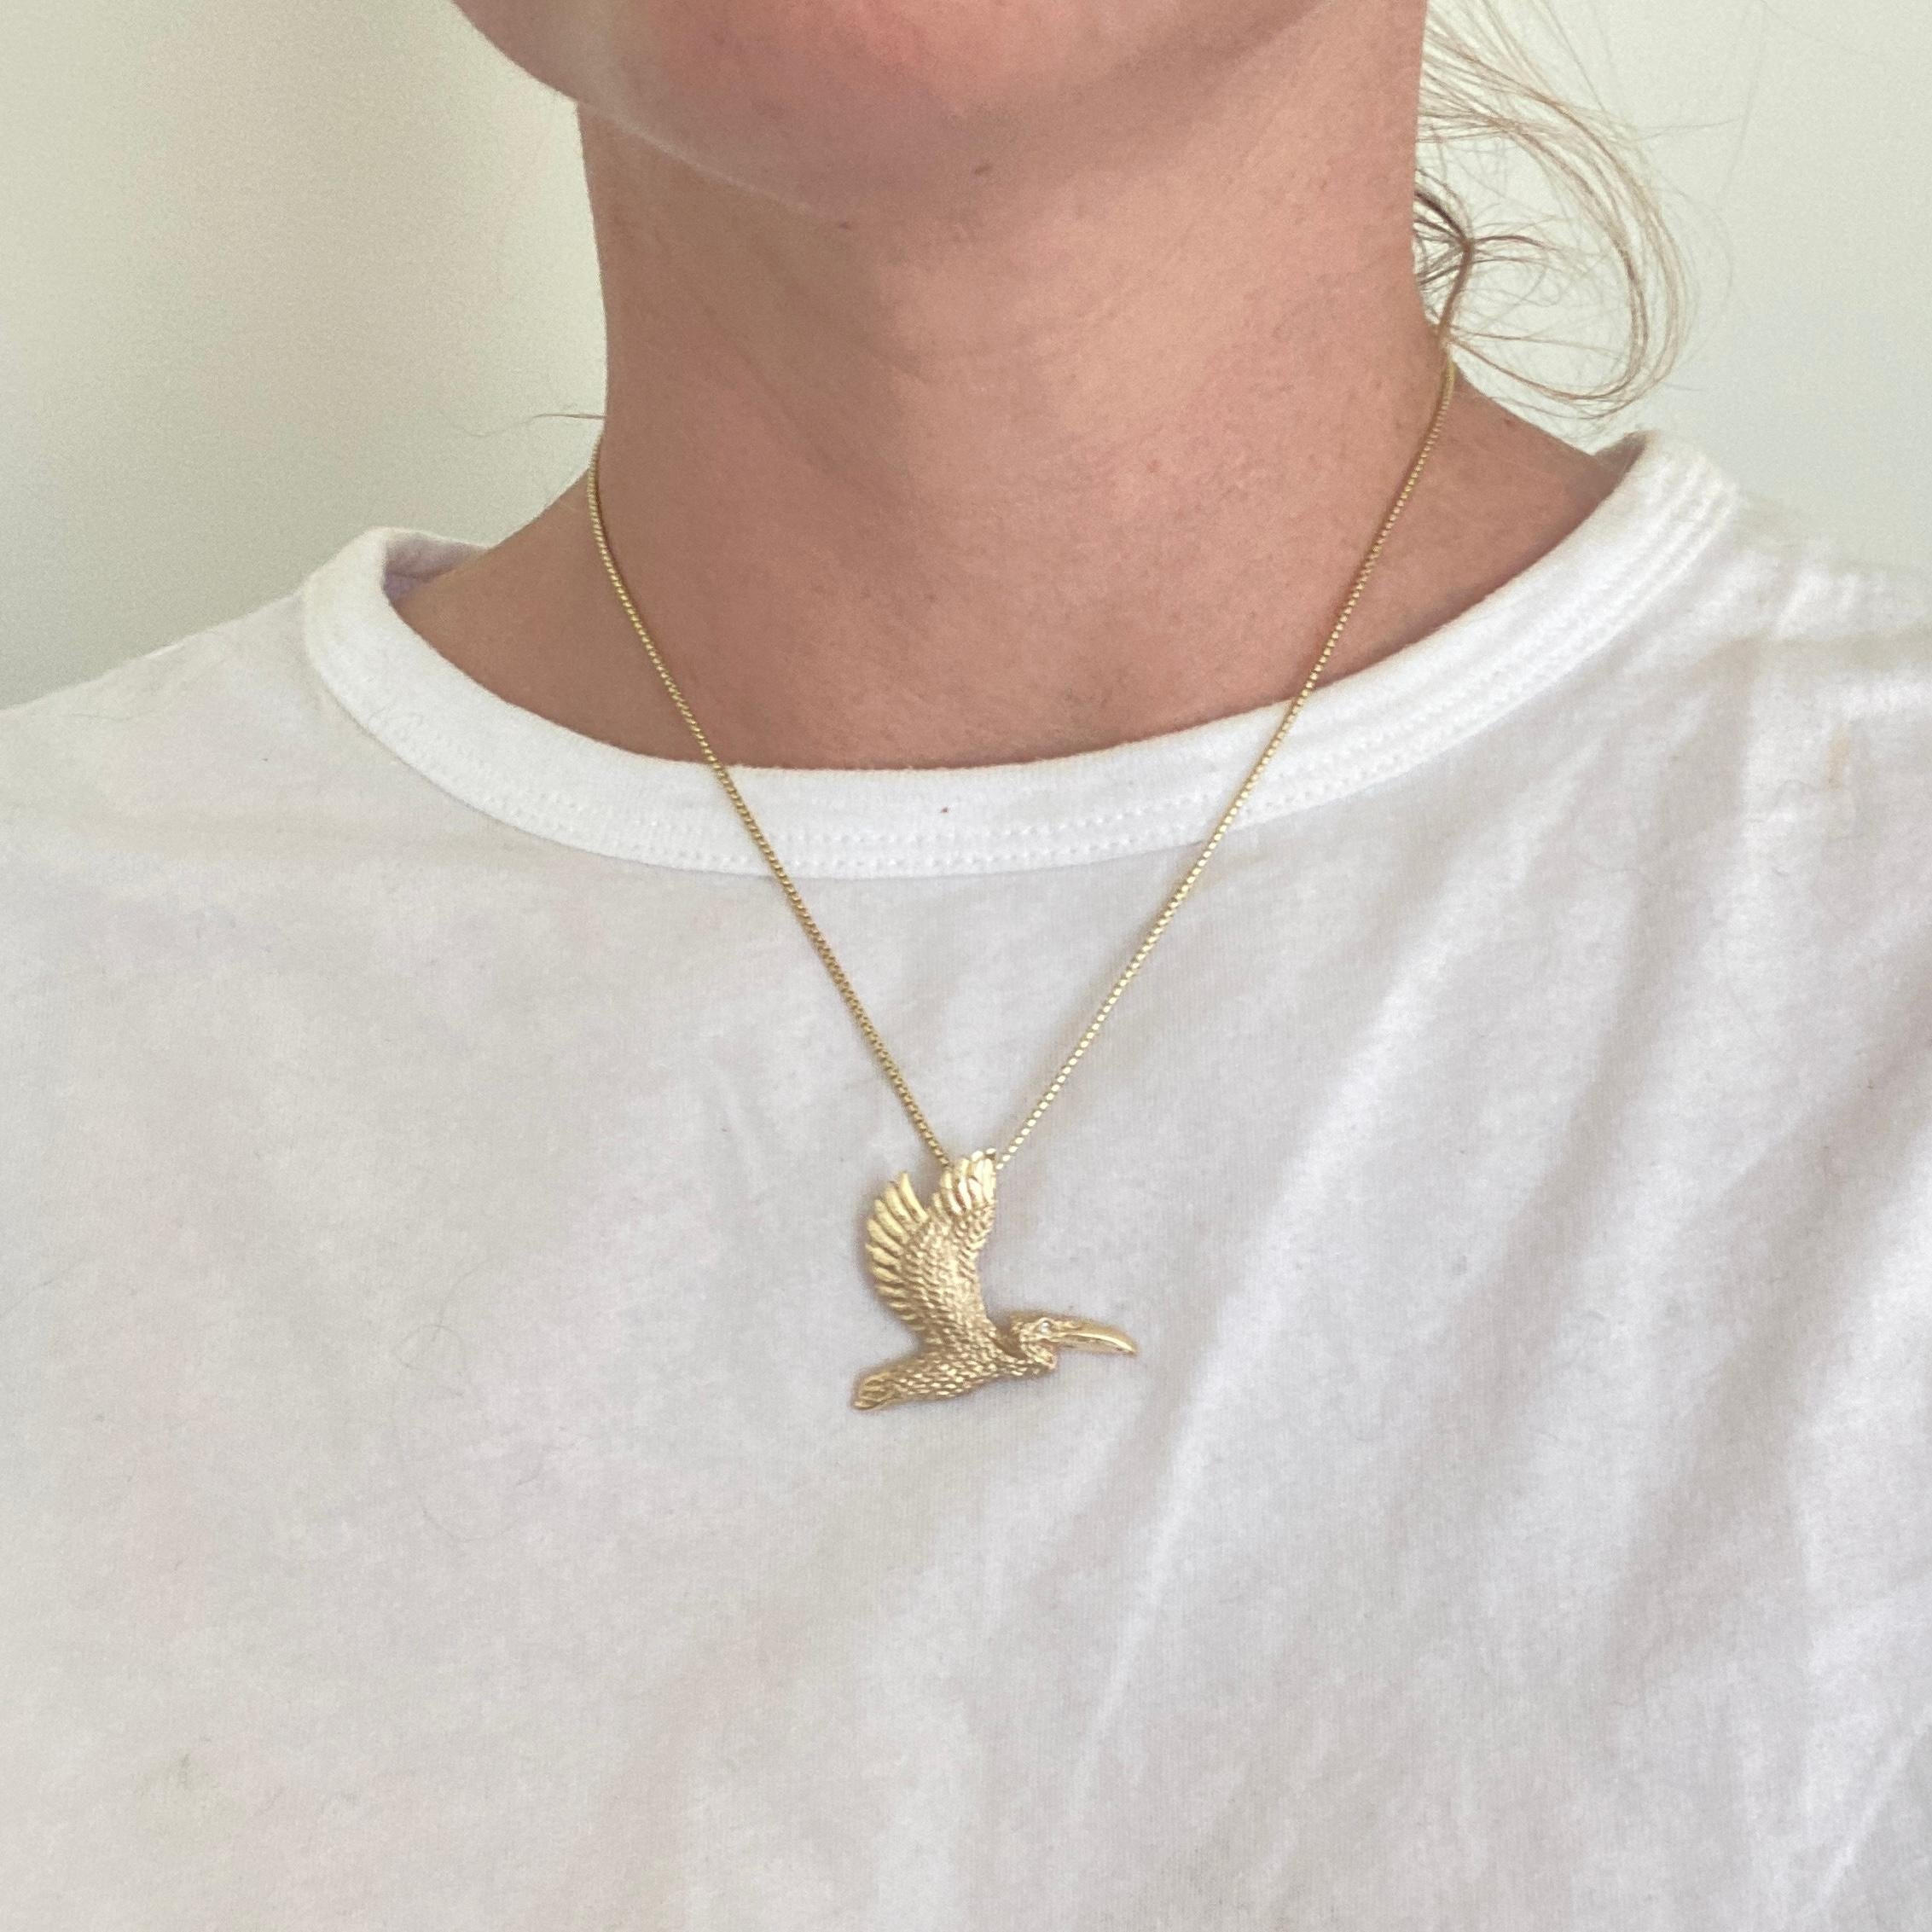 Detailed 14K Yellow Gold Pelican Pendant Necklace with Diamond Eye by Ashley Childs

Cicada originally carved by 